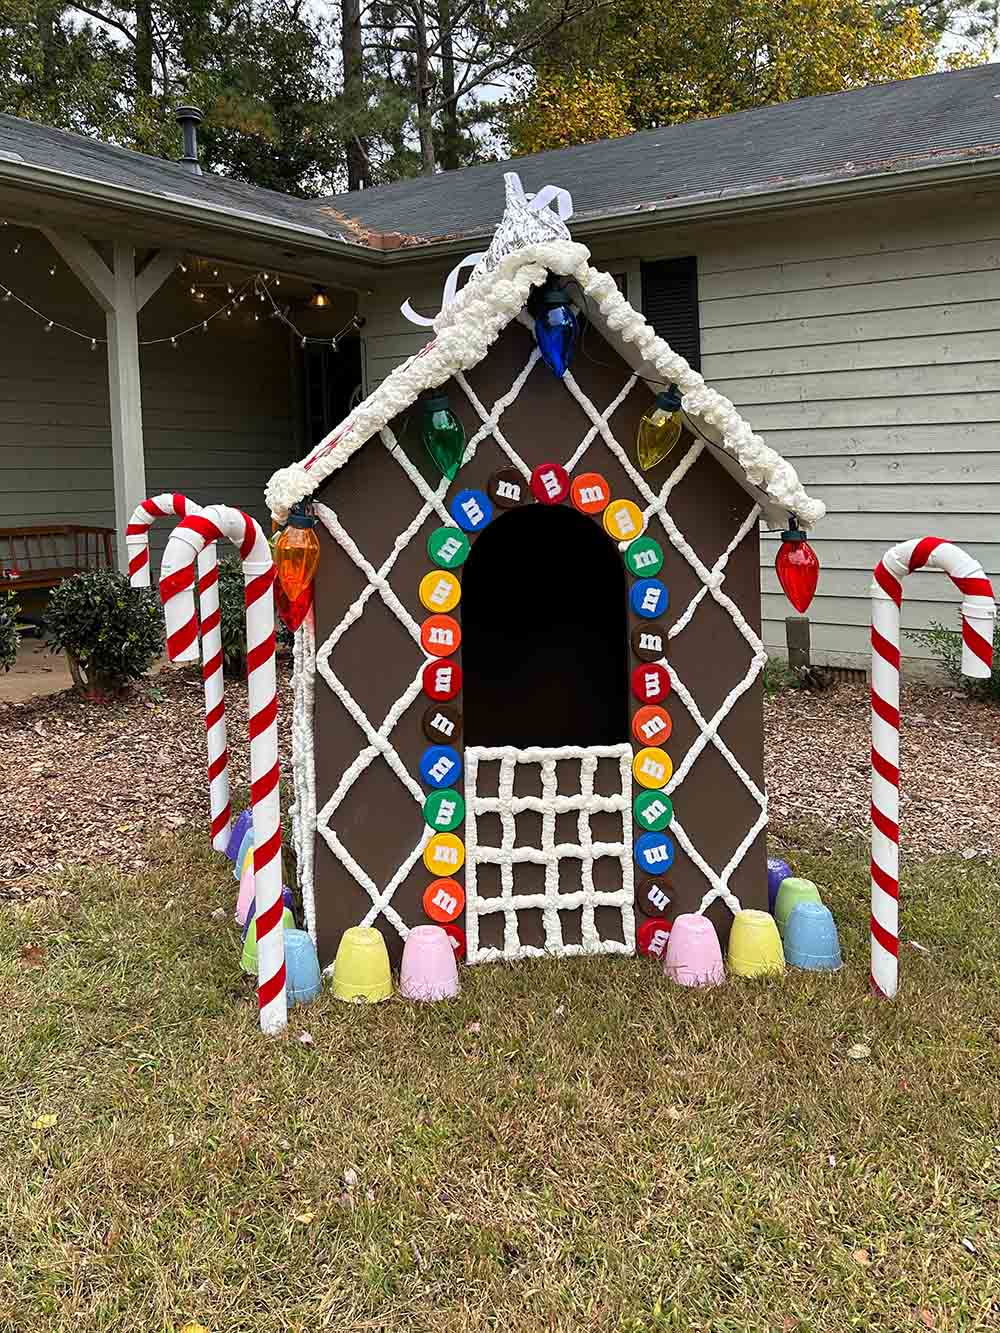 How to Build a Gingerbread Playhouse - The Home Depot